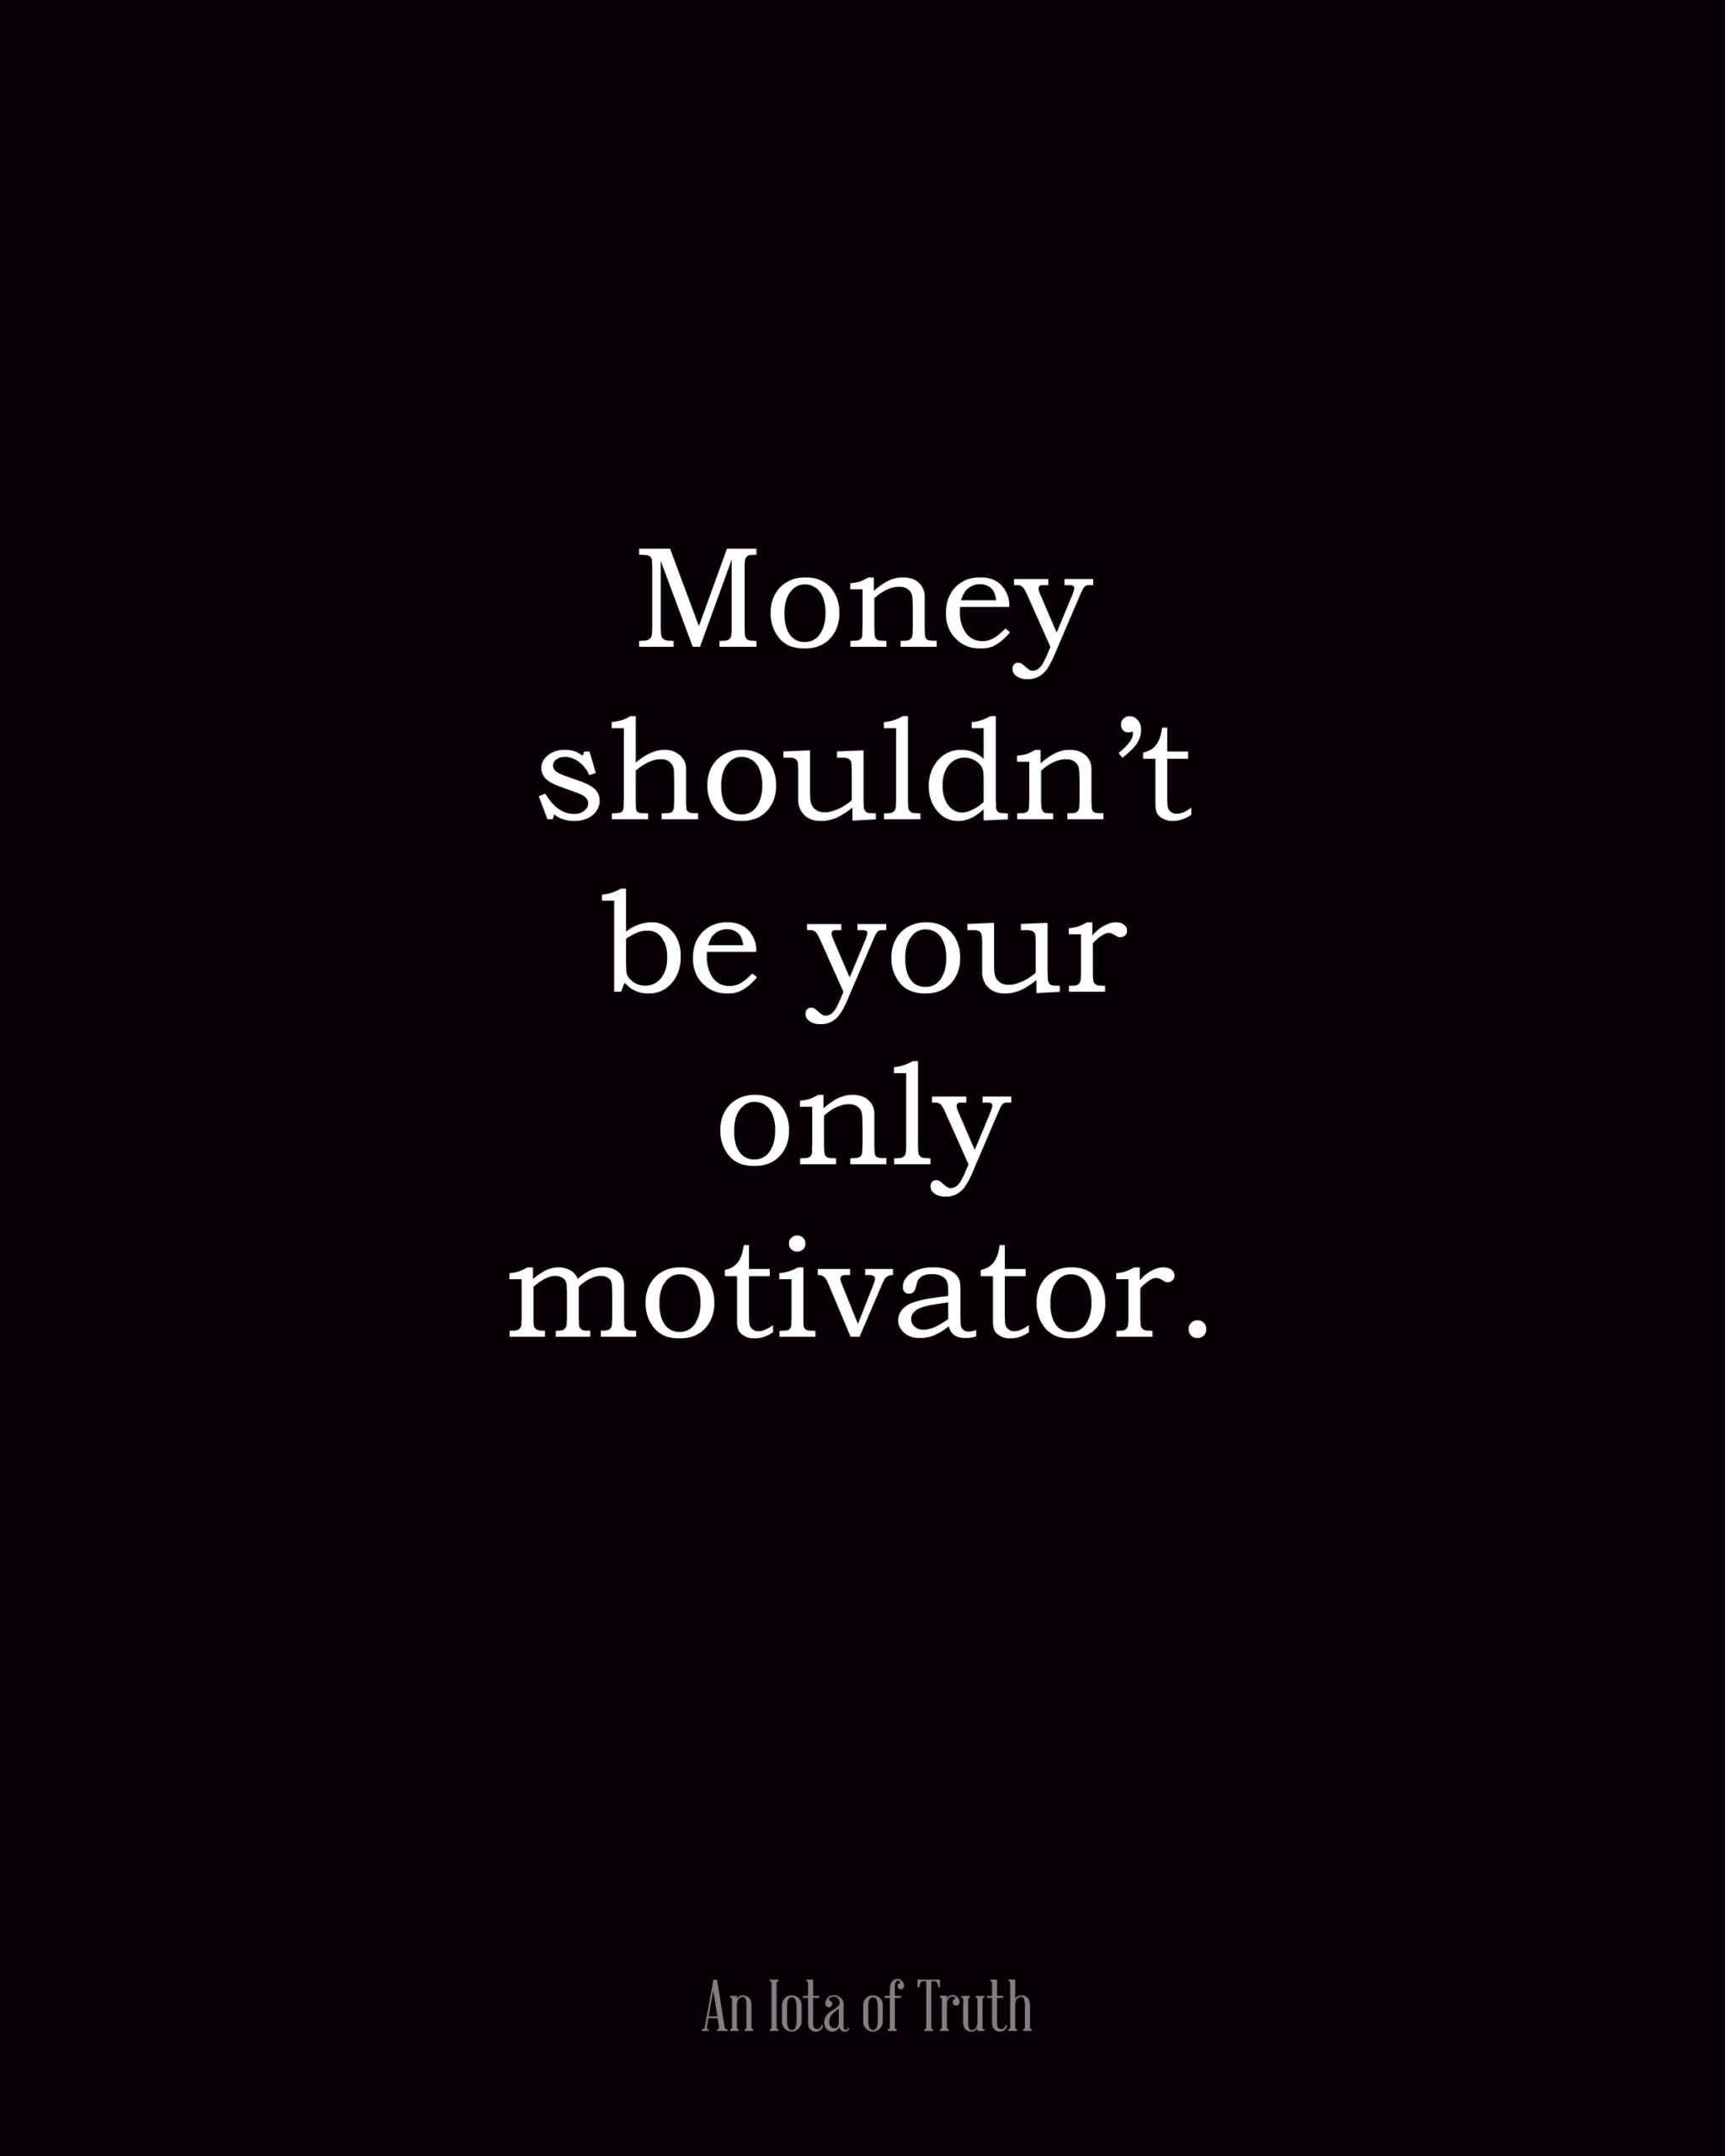 Money shouldn't be your only motivator.